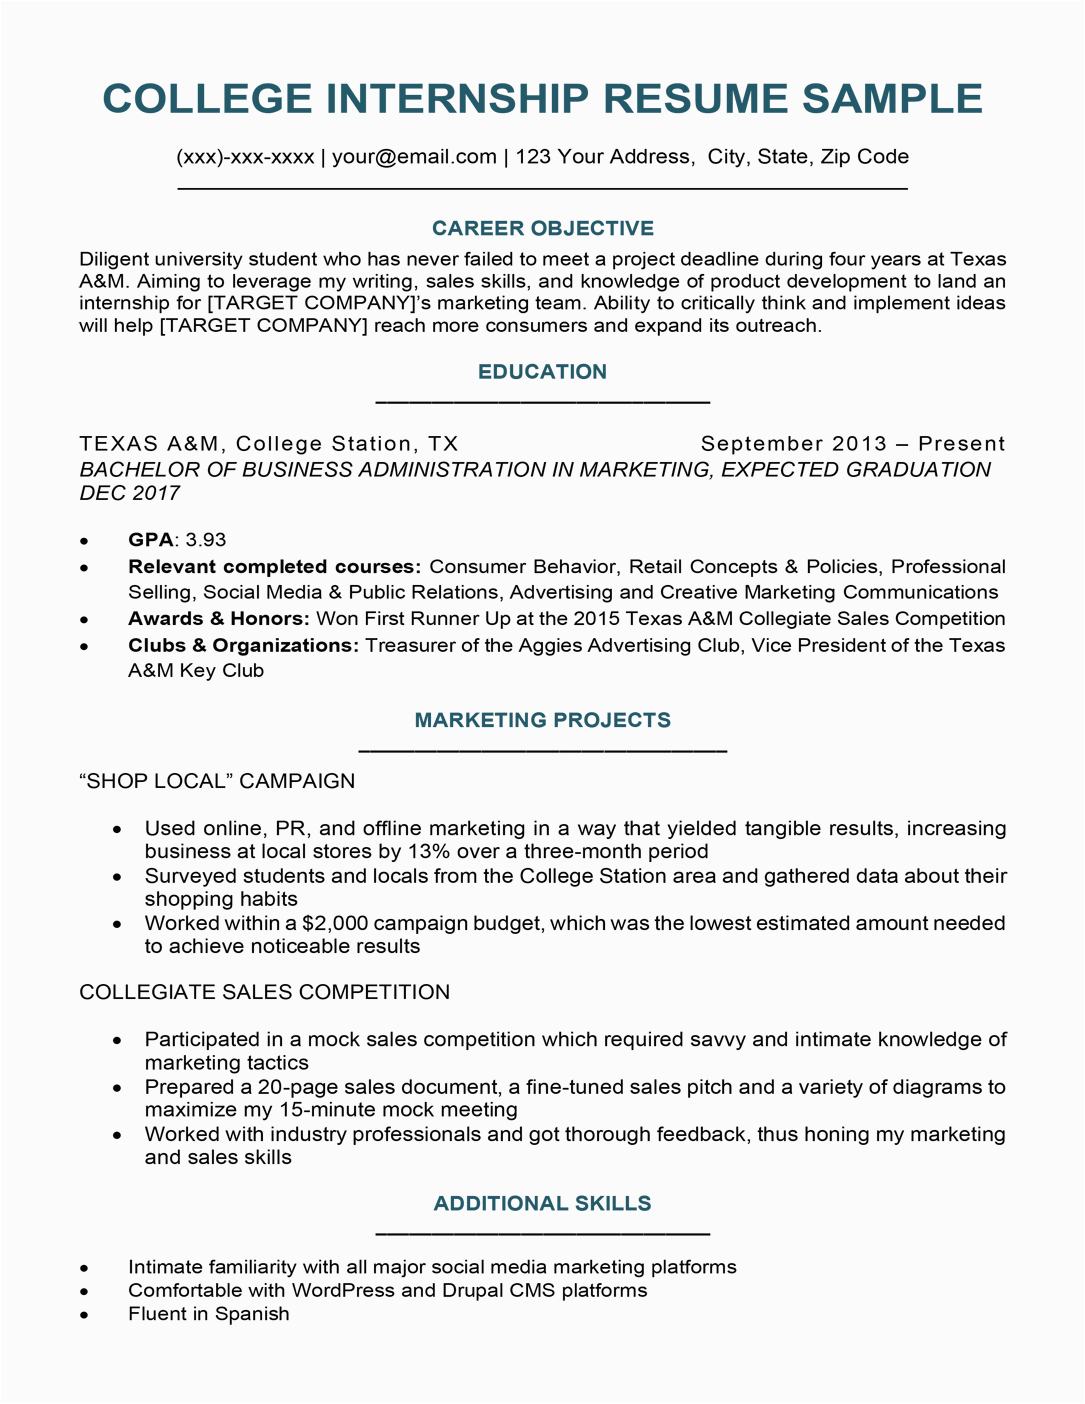 Good Resume Templates for College Students College Student Resume Sample & Writing Tips